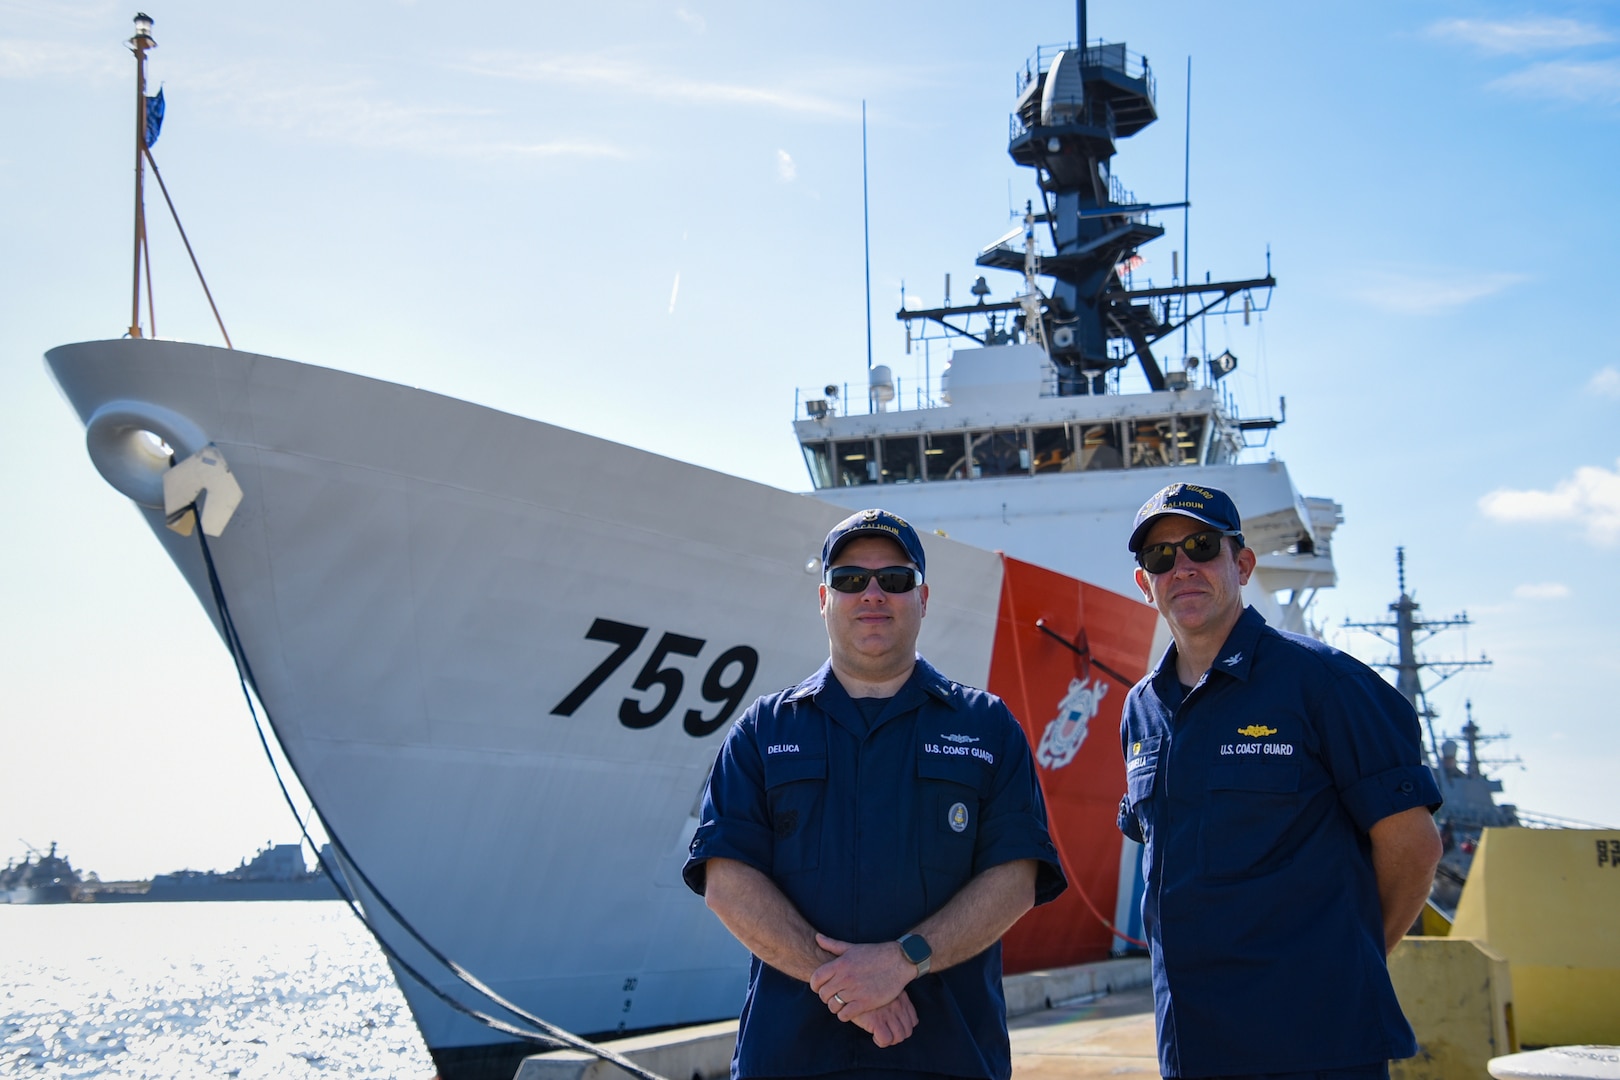 U.S. Coast Guard Capt. Timothy Sommella, commanding officer of the Coast Guard Cutter Calhoun, and Senior Chief Petty Officer Aaron Deluca, command senior enlisted leader, pose for a portrait in front of the Coast Guard Cutter Calhoun (WMSL 759) at Naval Station Mayport, Florida, Dec. 1, 2023. The cutter’s namesake, Master Chief Petty Officer Charles Calhoun, served as the Coast Guard’s first master chief petty officer from August 1969 to August 1973.